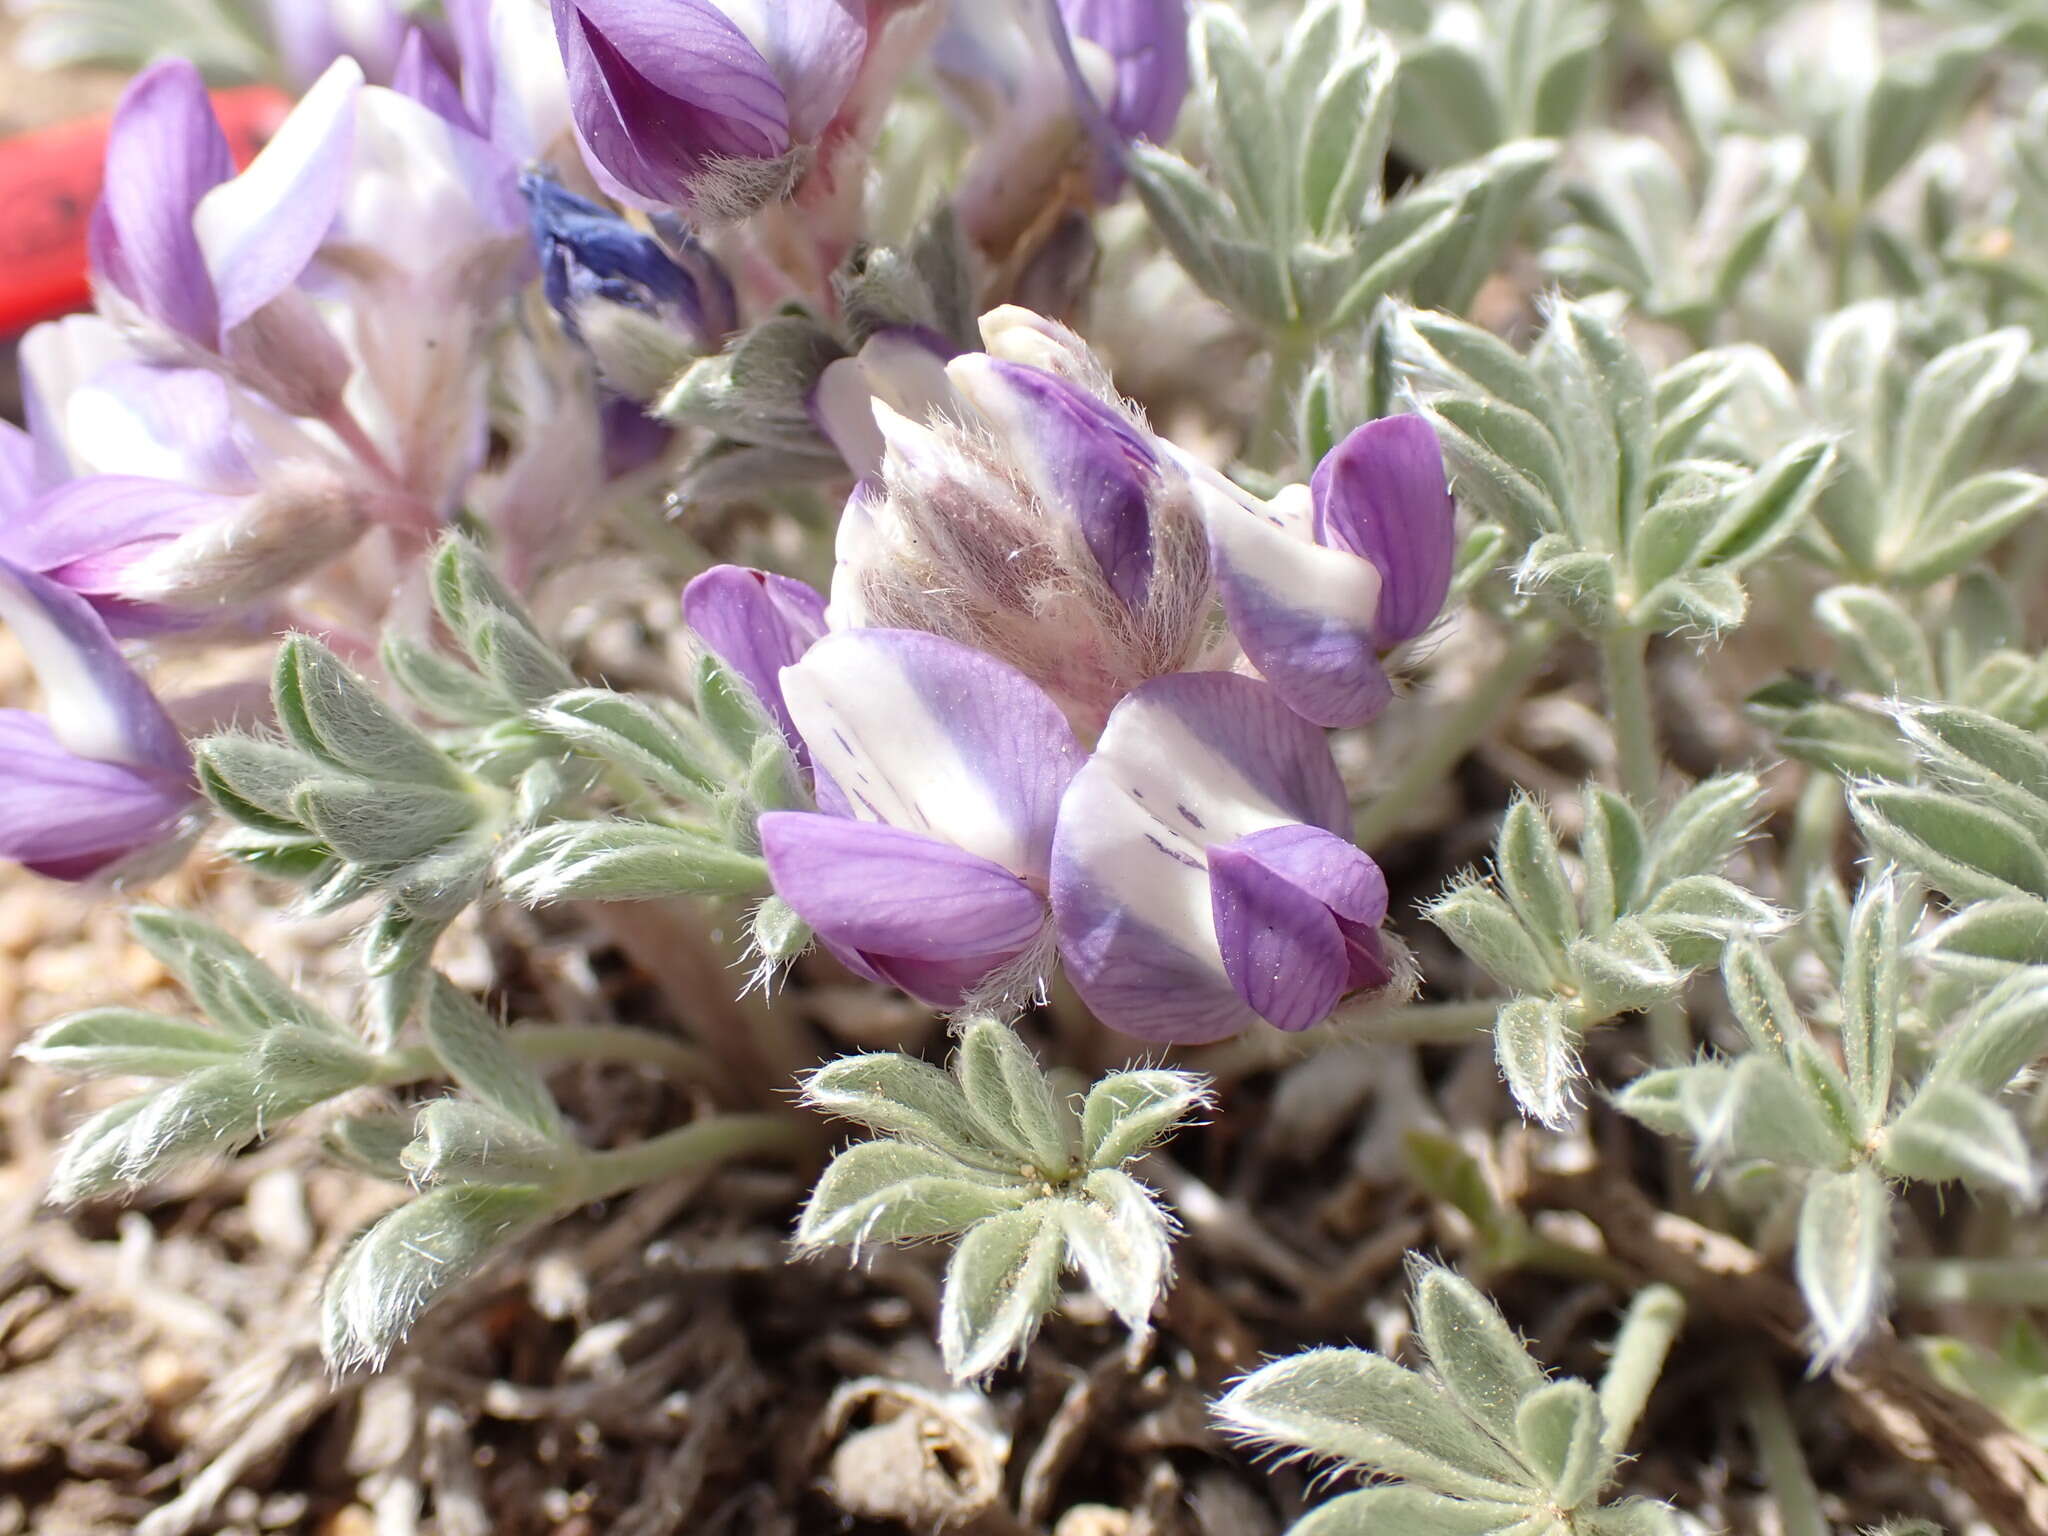 Image of matted lupine